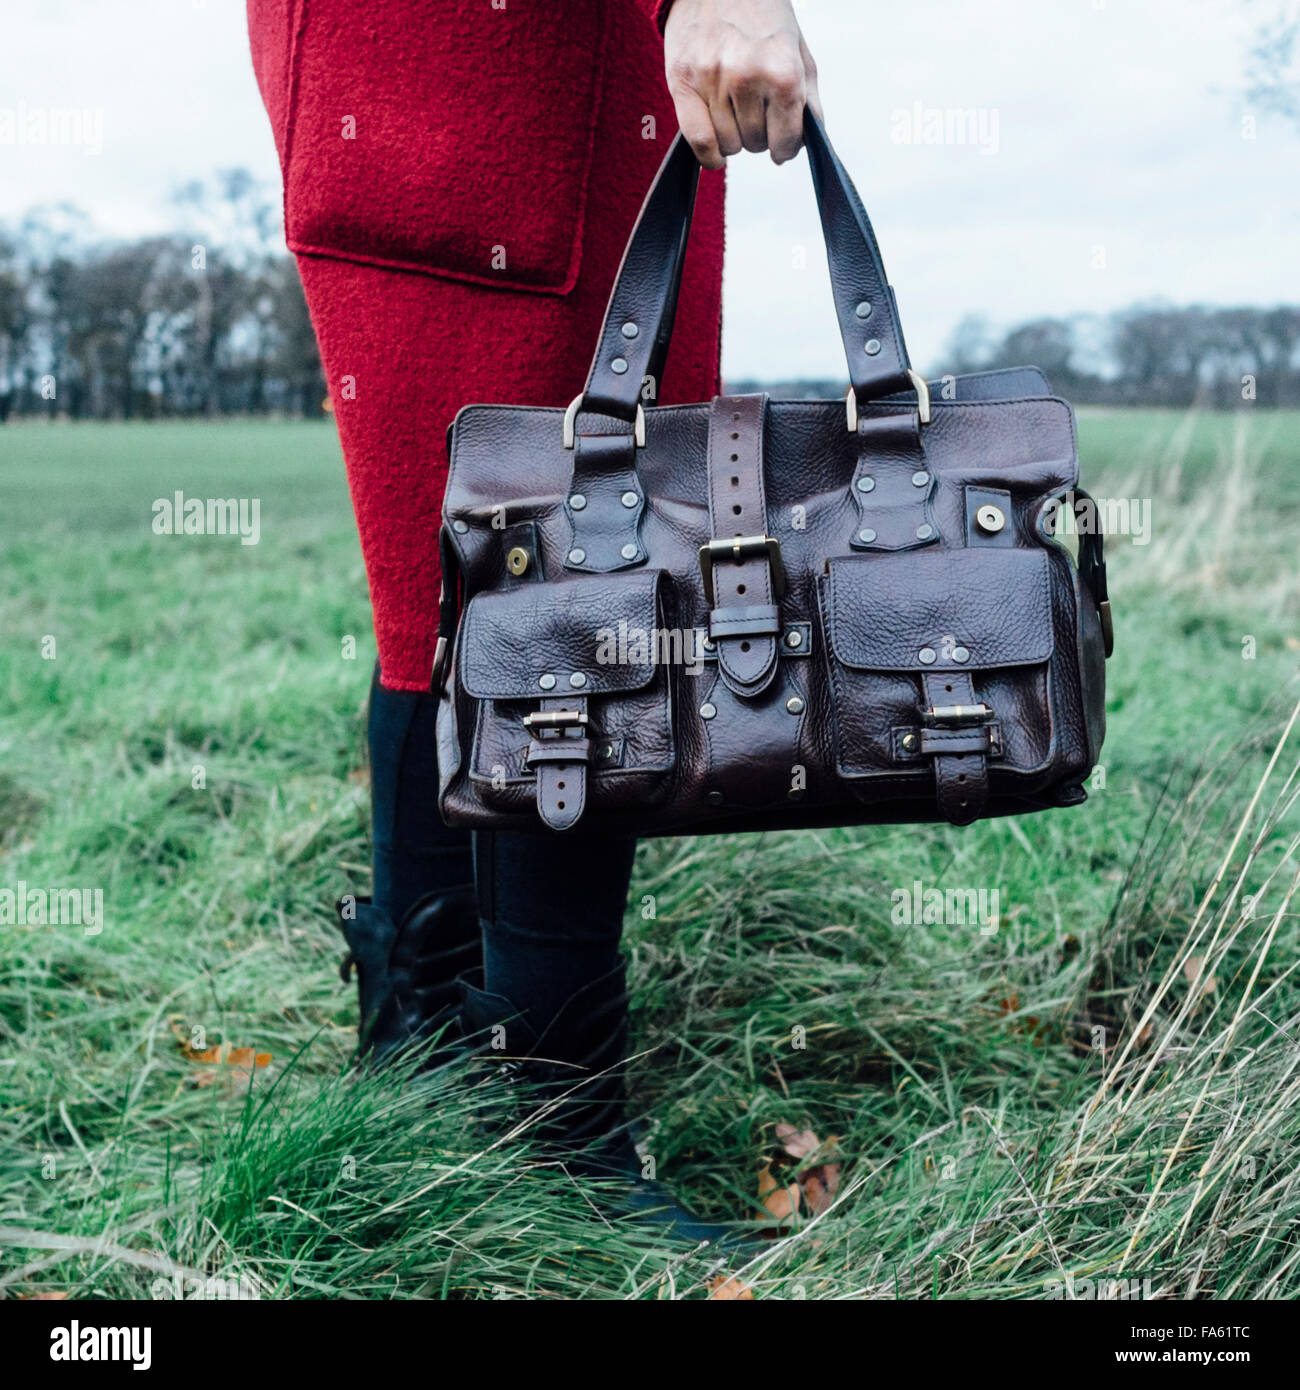 Woman in red overcoat holding a Mulberry Roxanne leather handbag